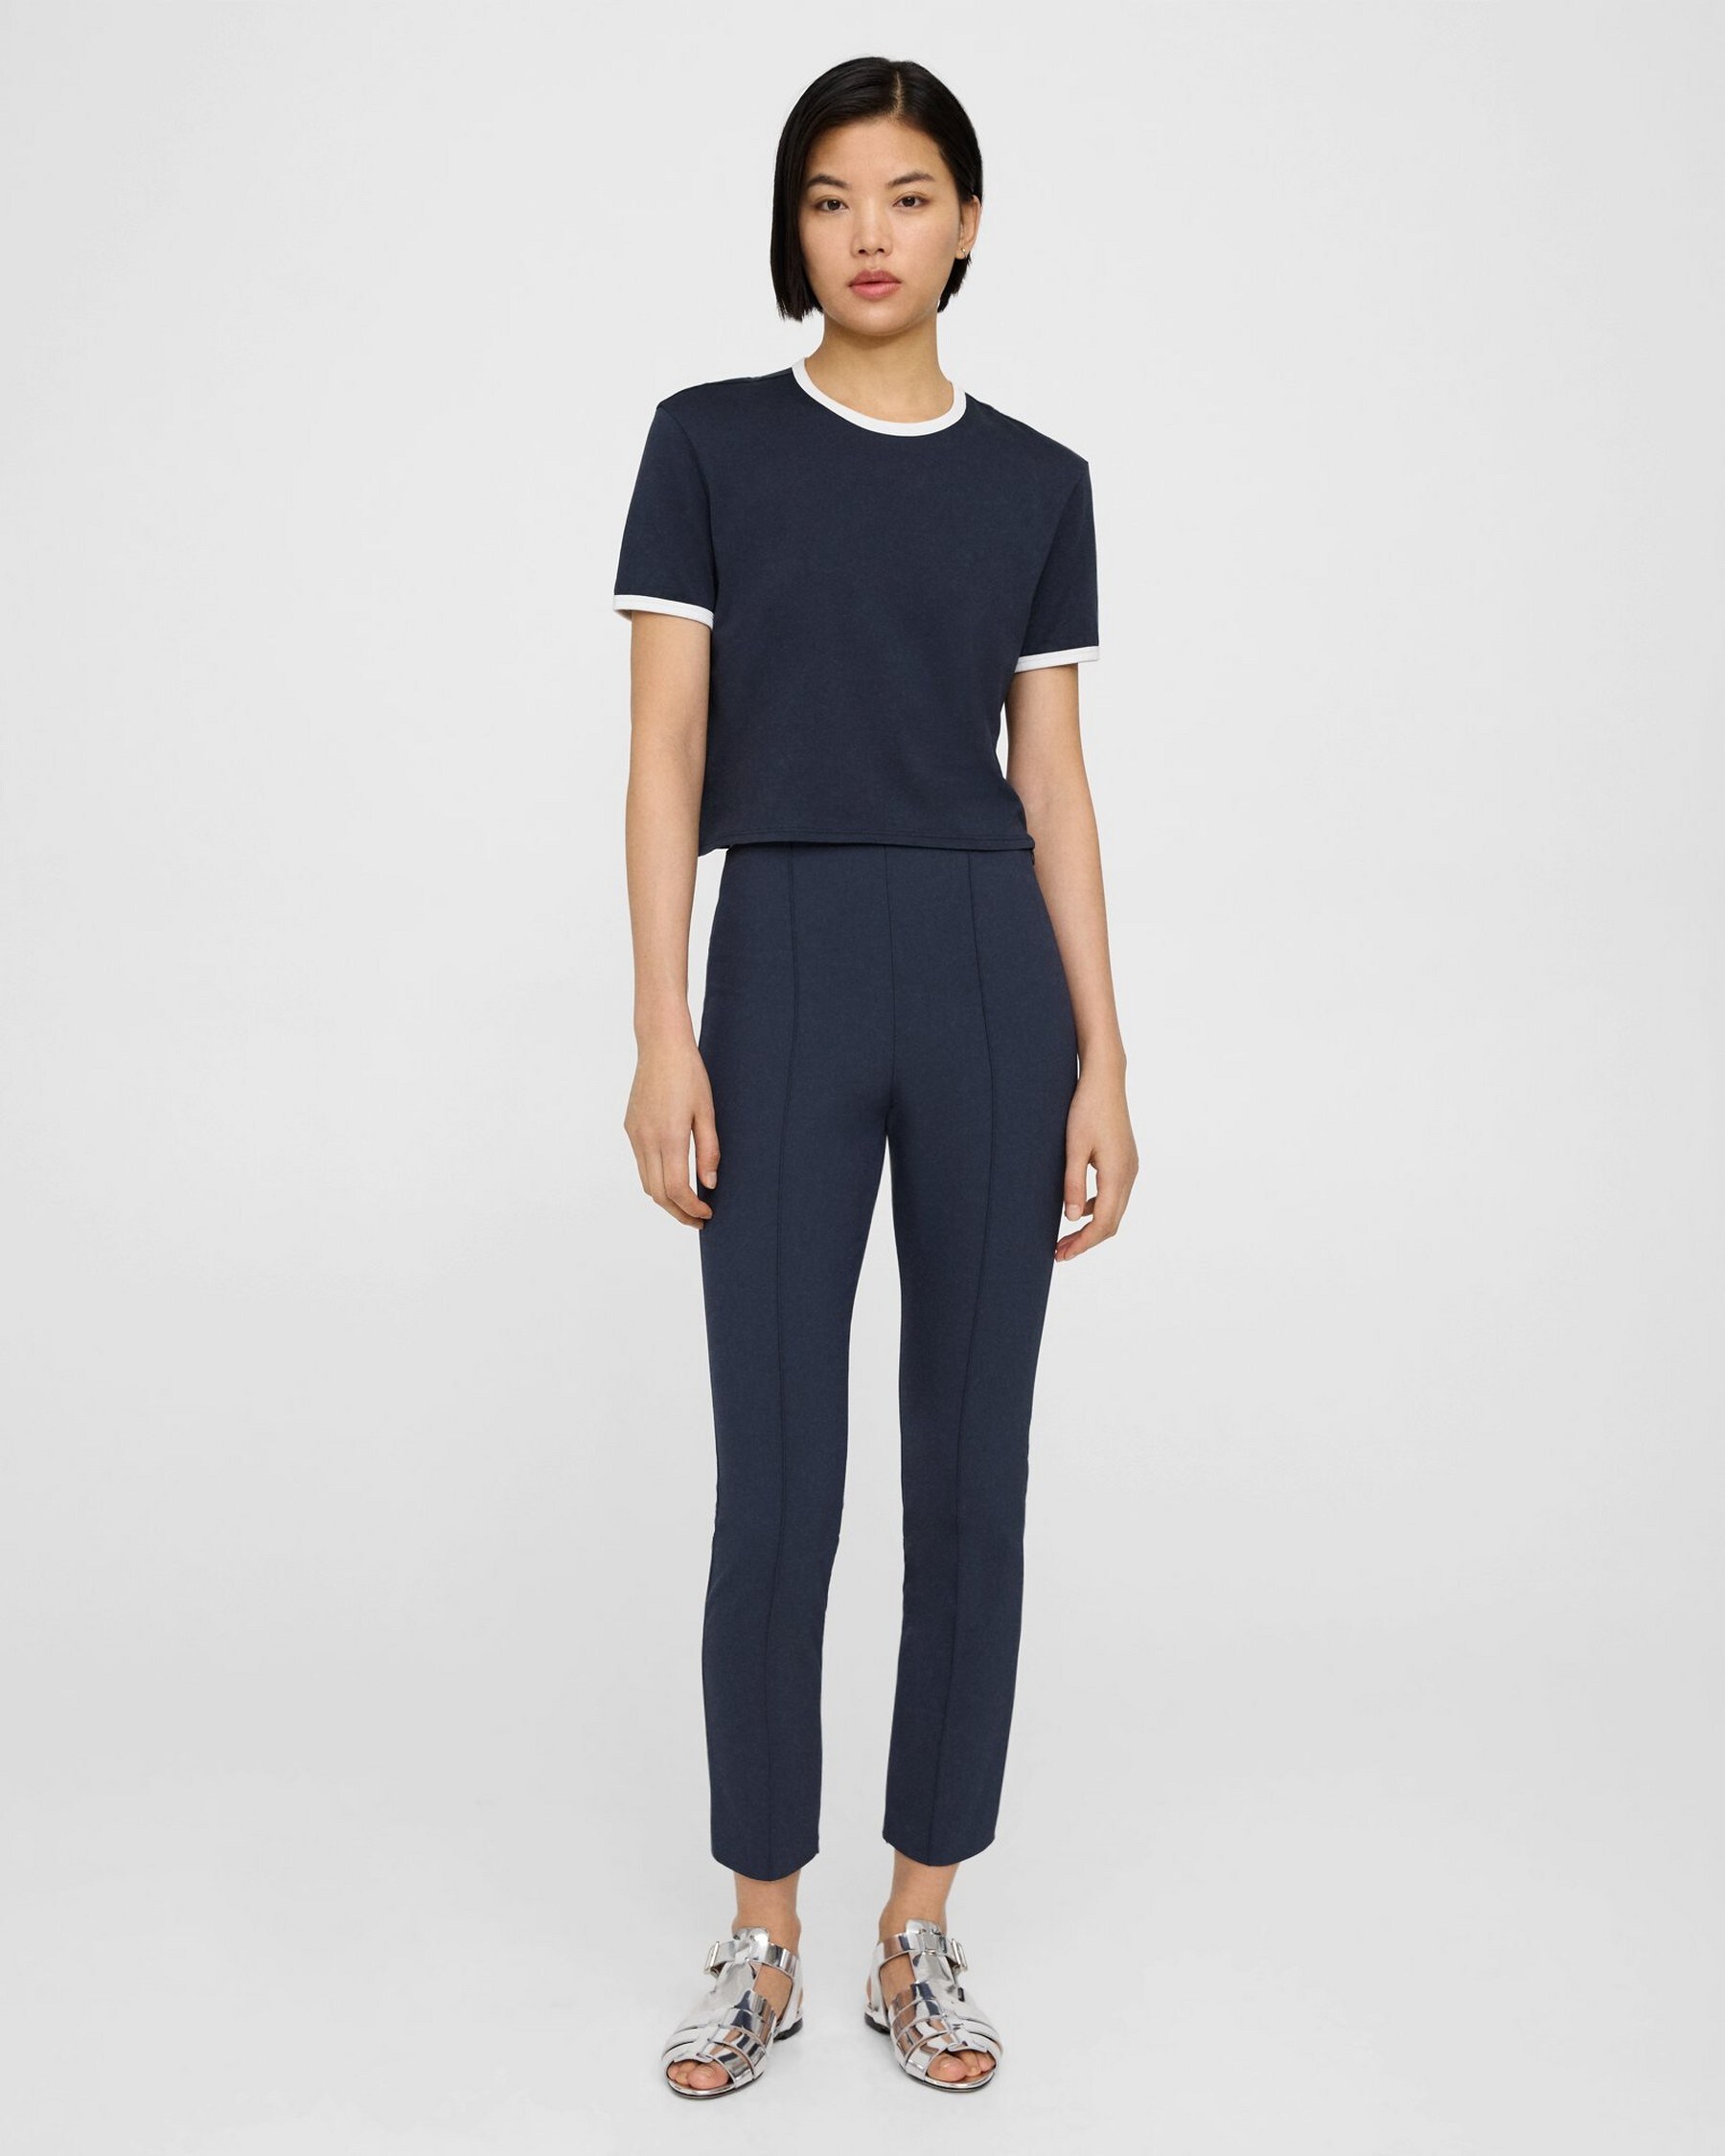 Pintucked Slim Pant in Stretch Cotton